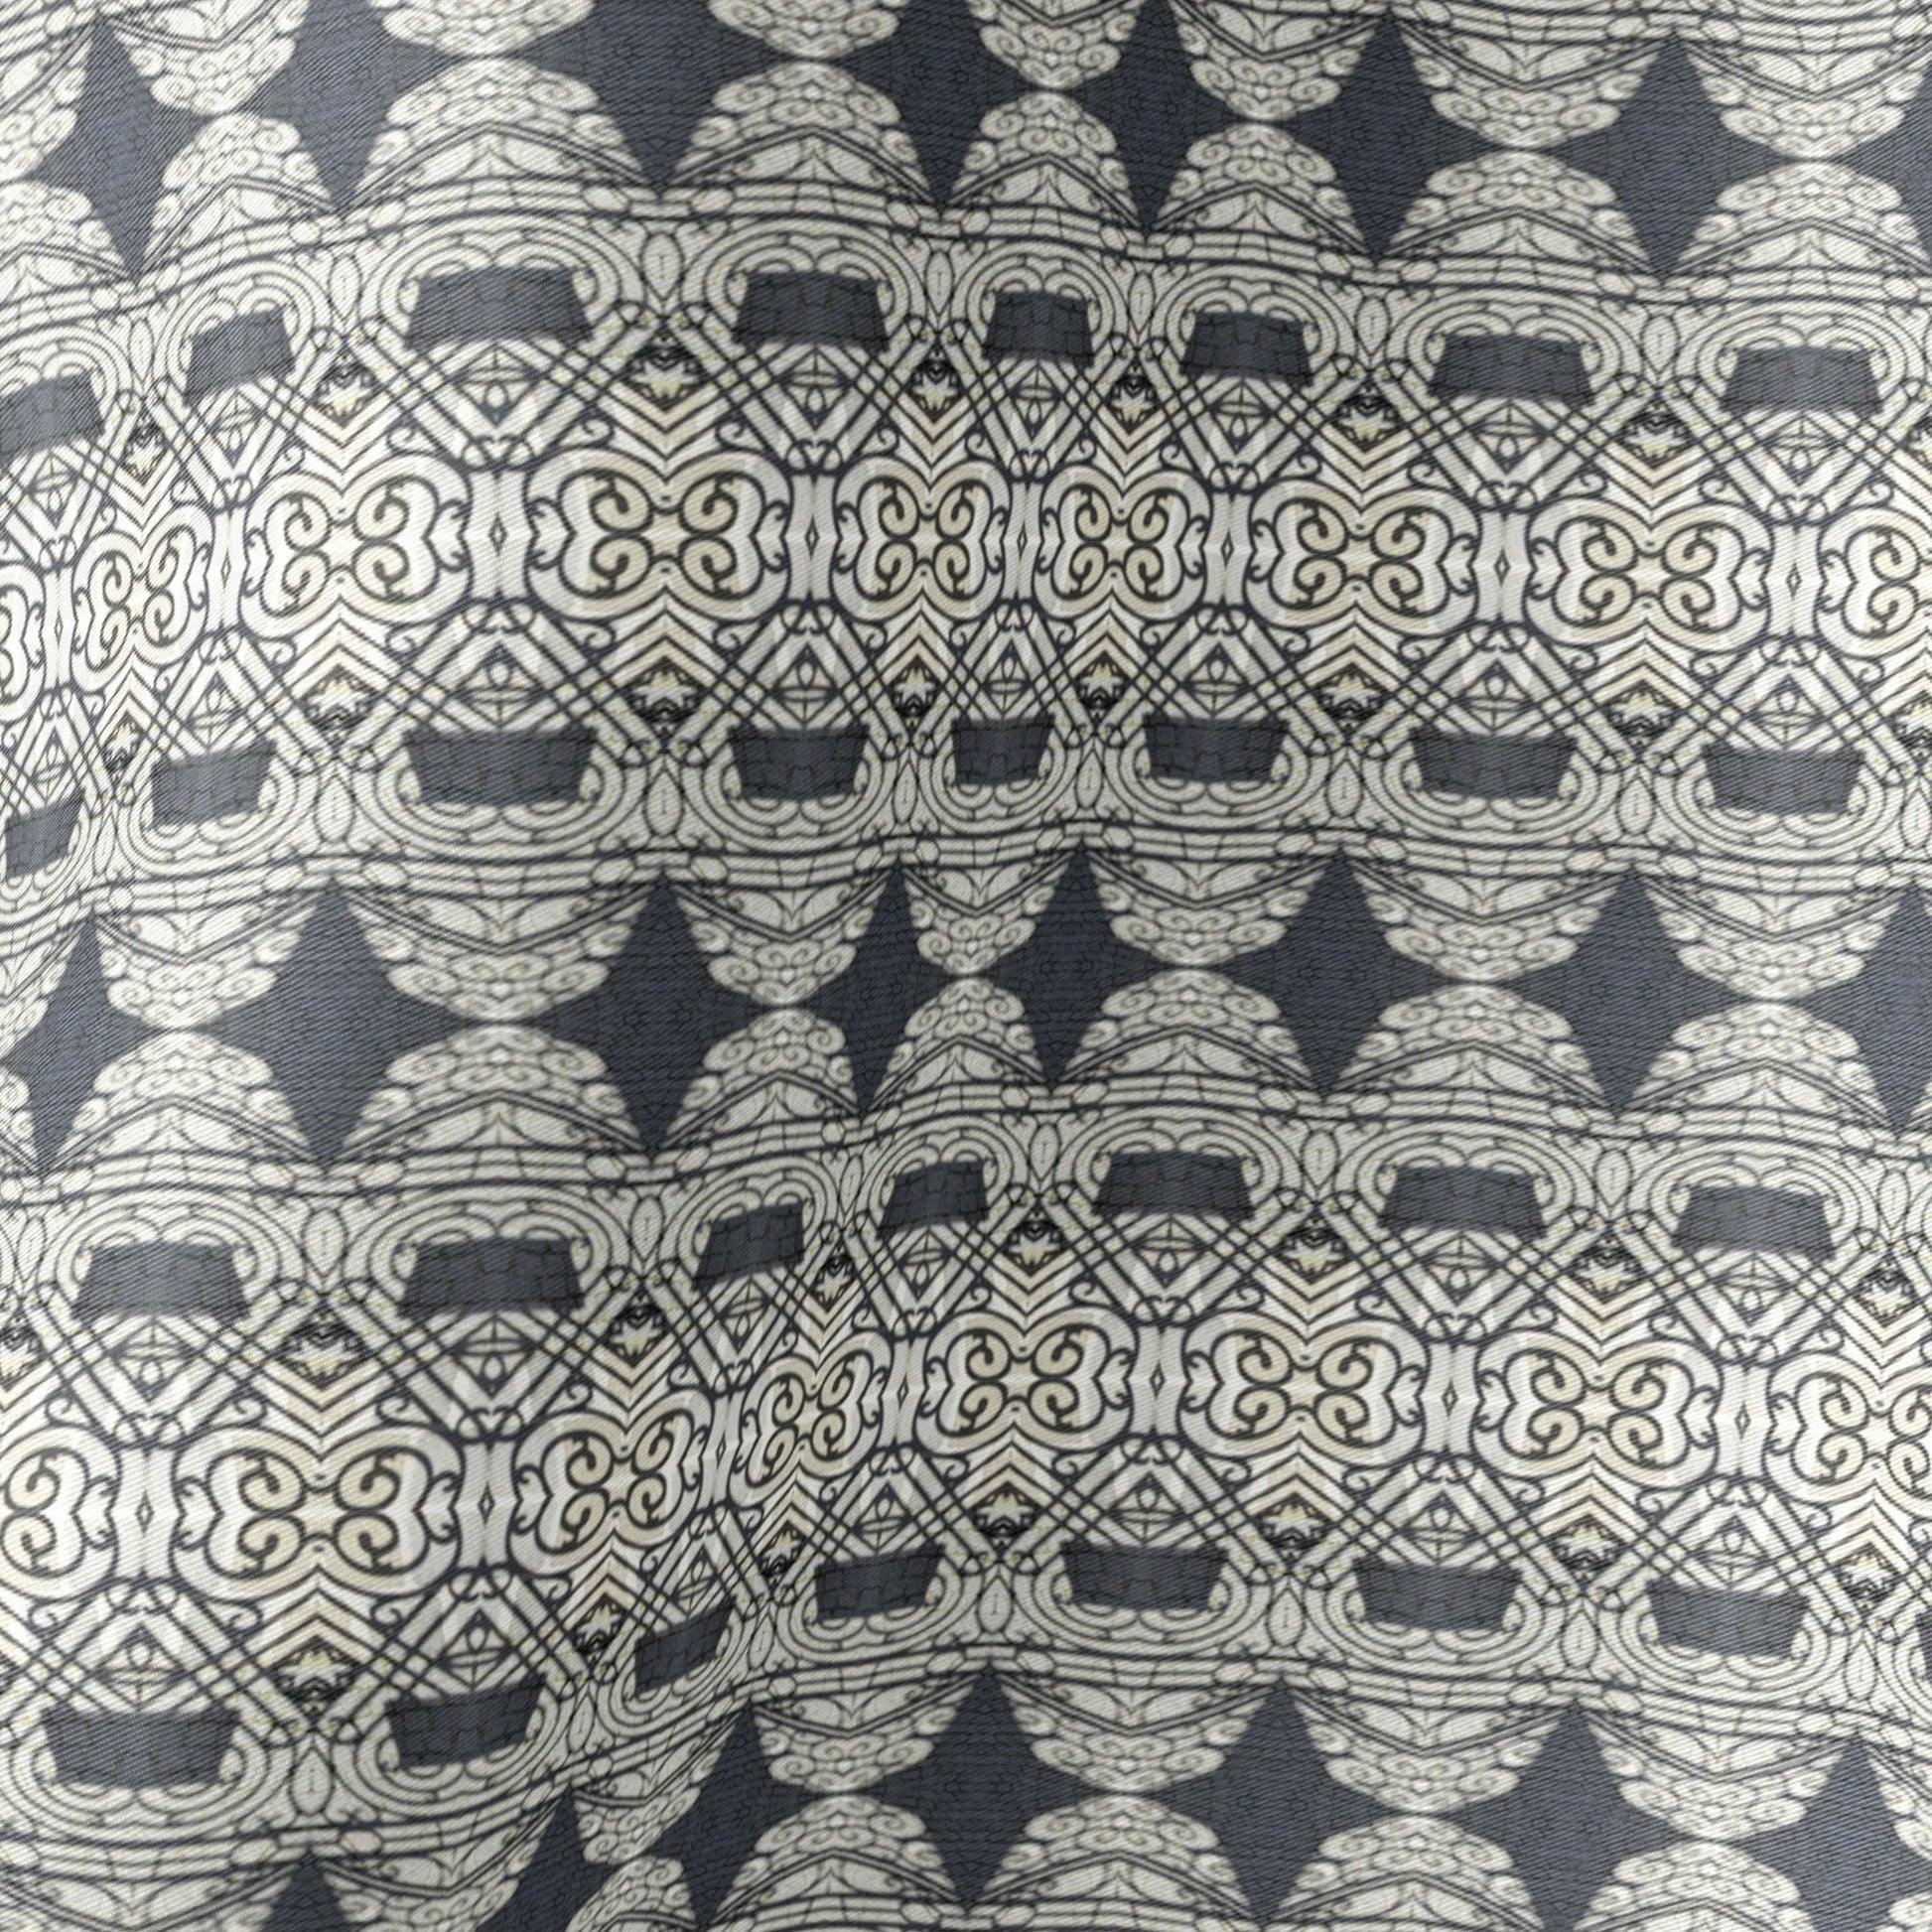 Detail of silk scarf featuring an abstract geometric pattern in gray and black.